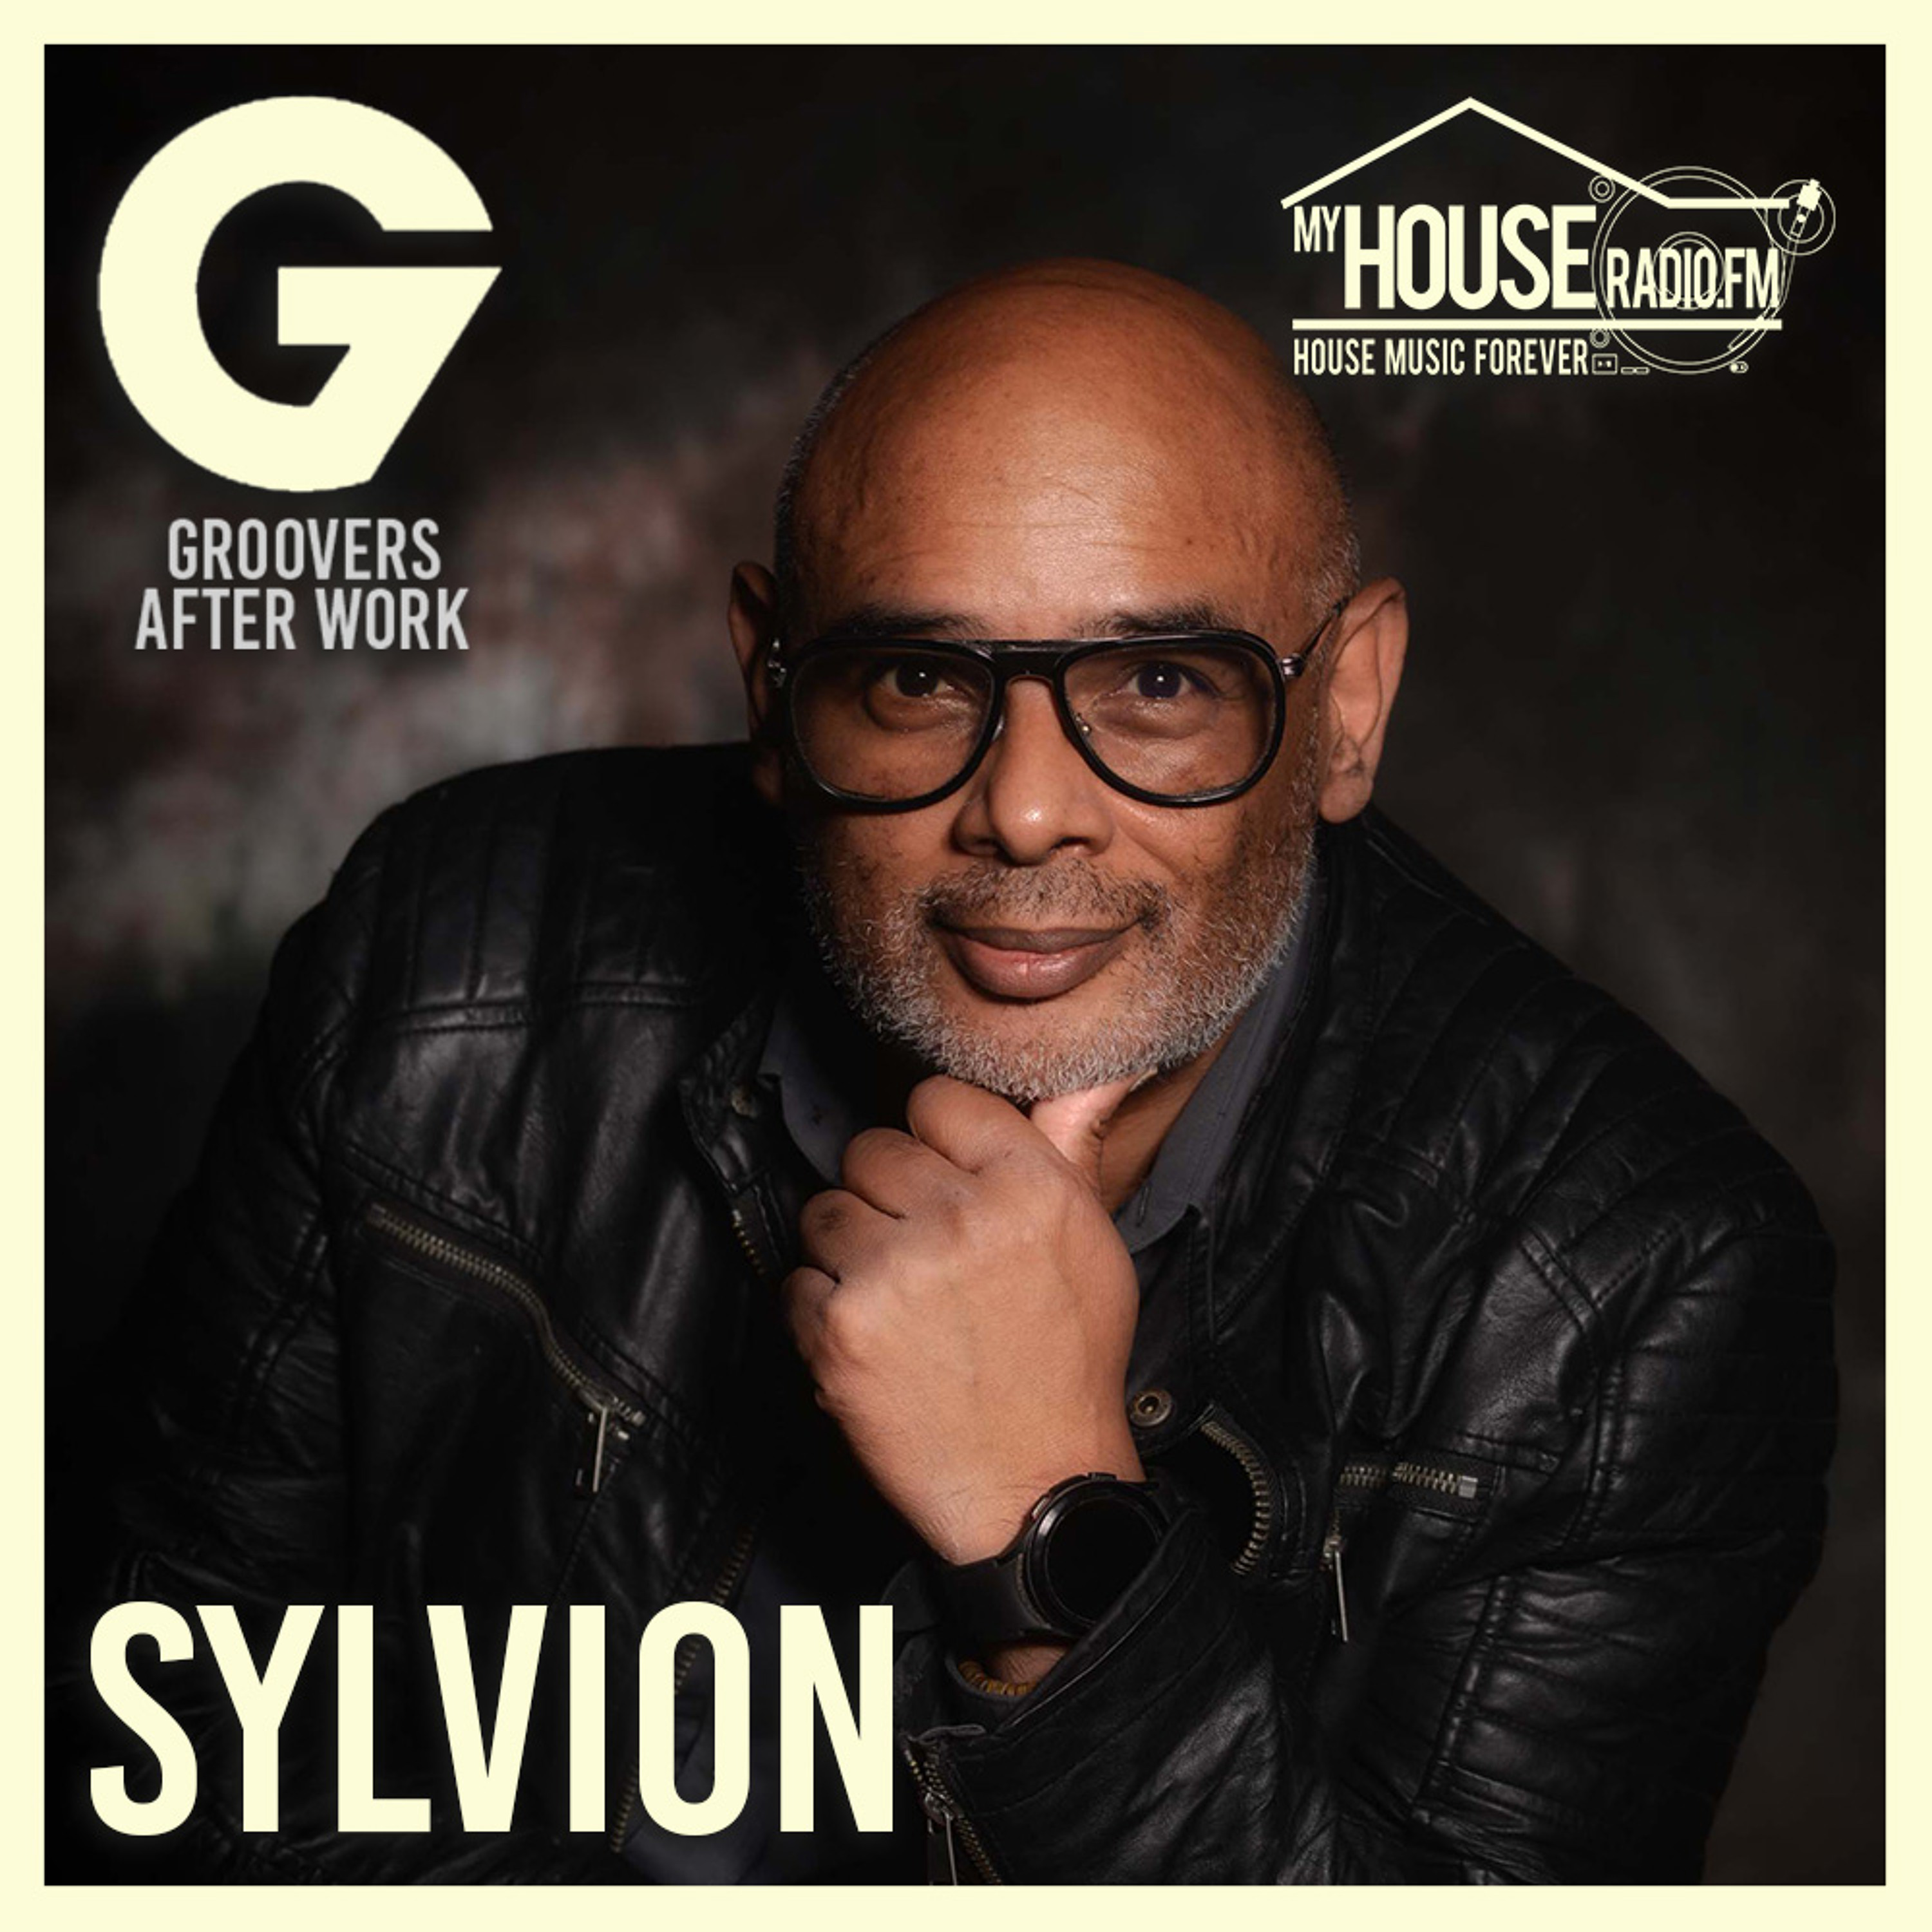 23#21 After Work On My House Radio By SylvioN